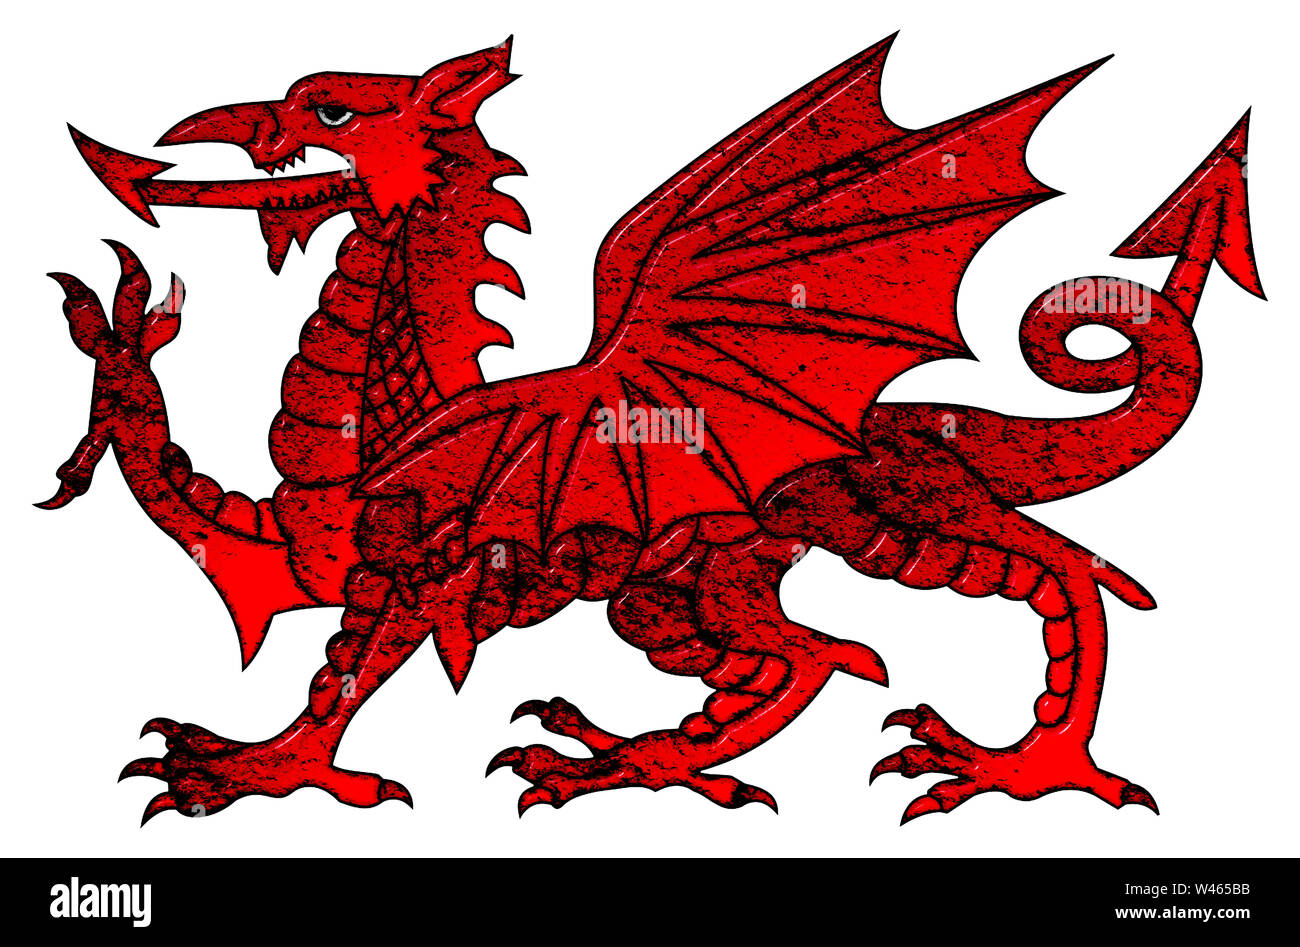 Welsh dragon 3D illustration with a grungy bevel effect on an isolated white background Stock Photo